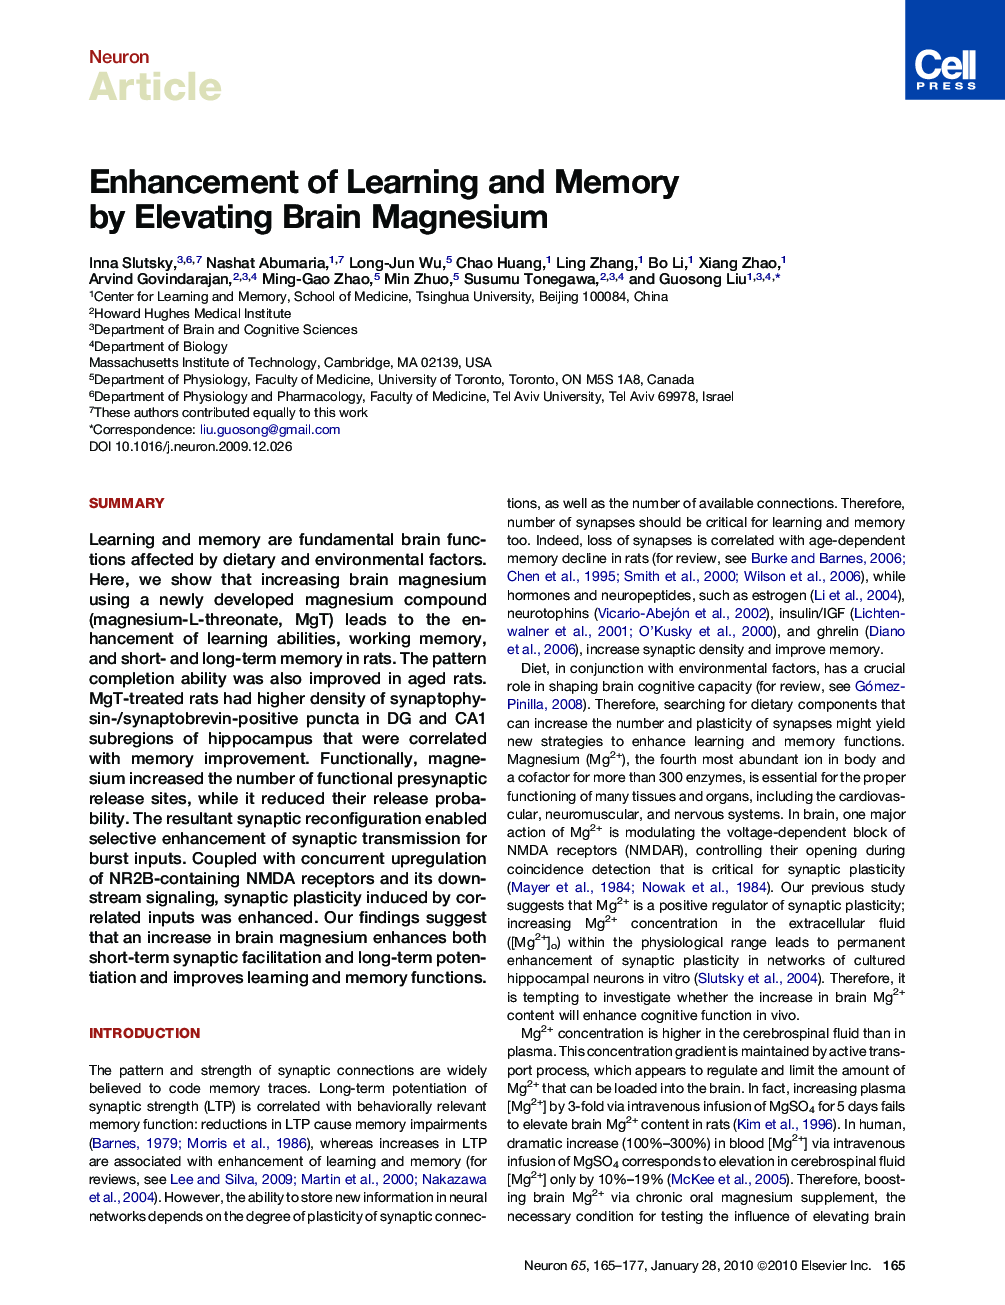 Enhancement of Learning and Memory by Elevating Brain Magnesium